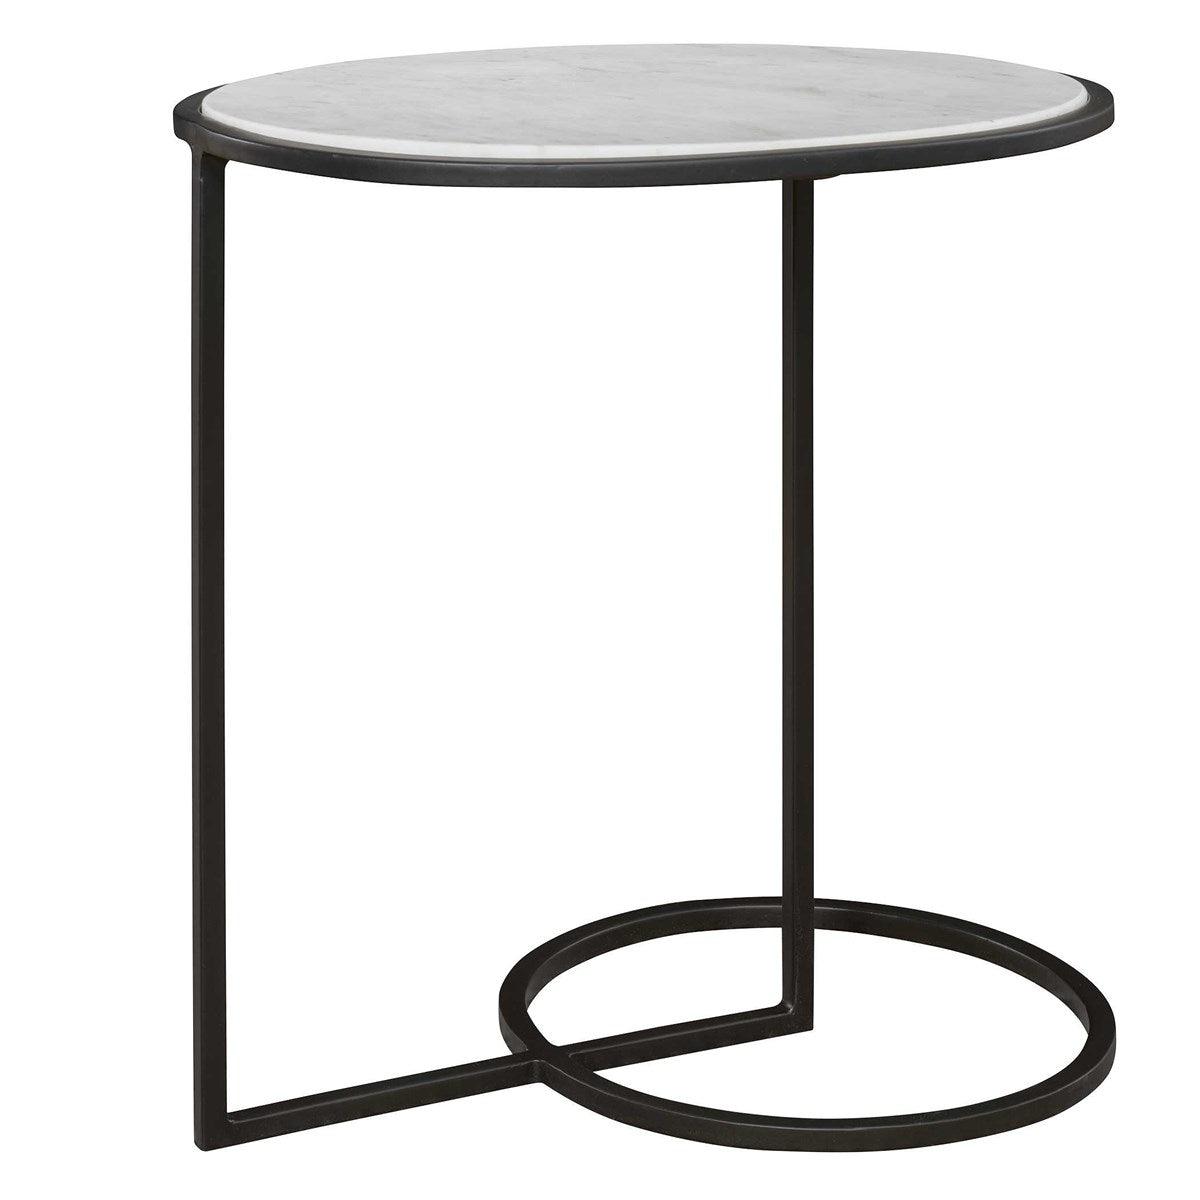 The Uttermost - Twofold Accent Table - 25749 | Montreal Lighting & Hardware